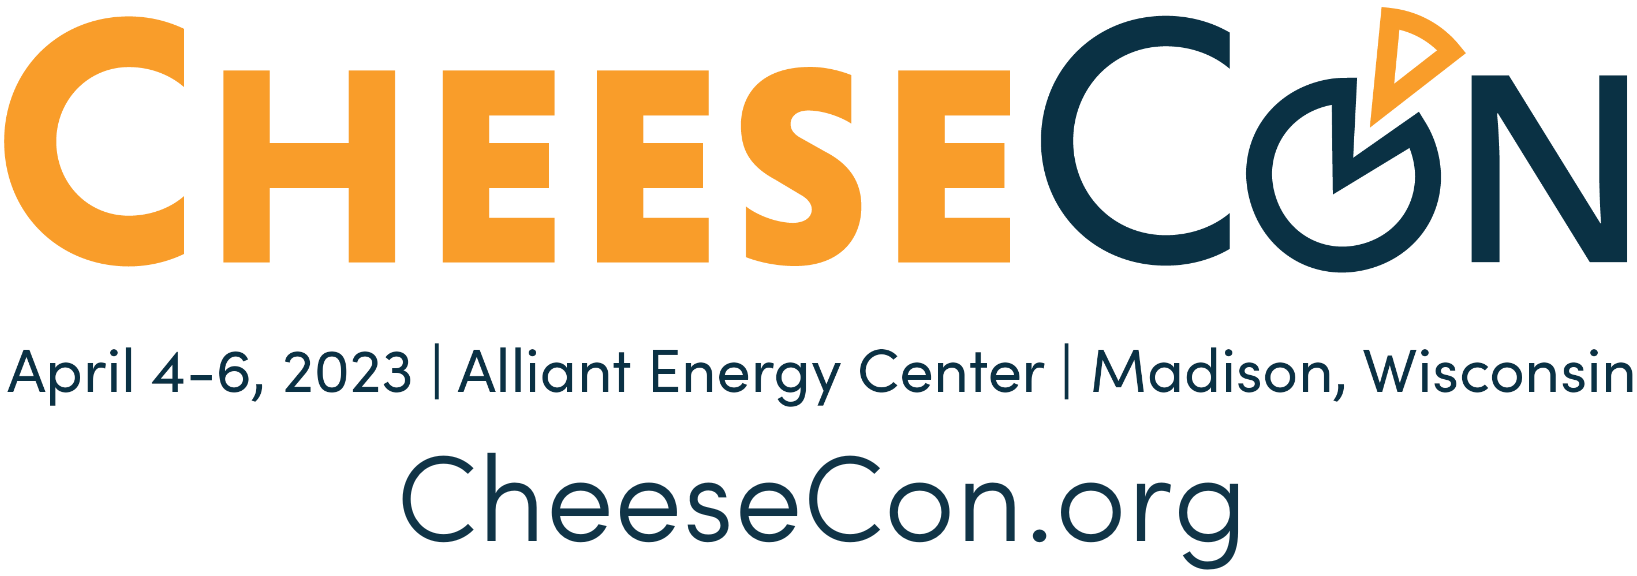 CheeseCon Logo with website